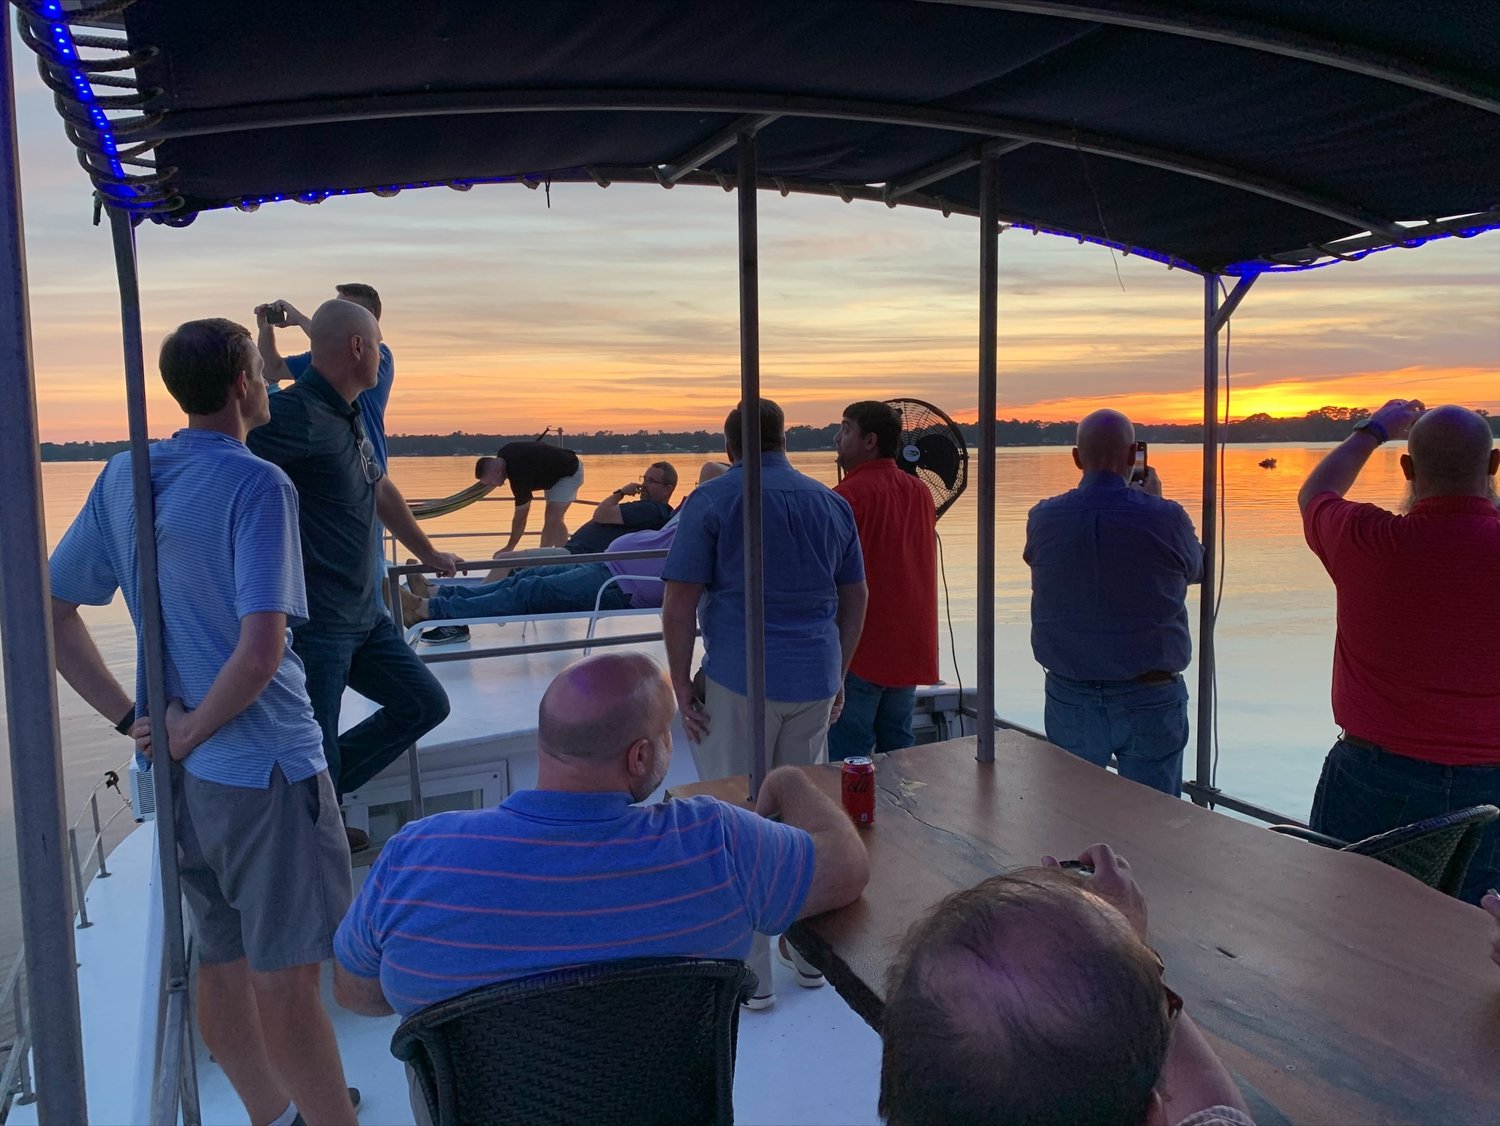 Pastors enjoy a boat ride as part of a get-together to discuss the learning communities, an ancient concept that is coming back into vogue.